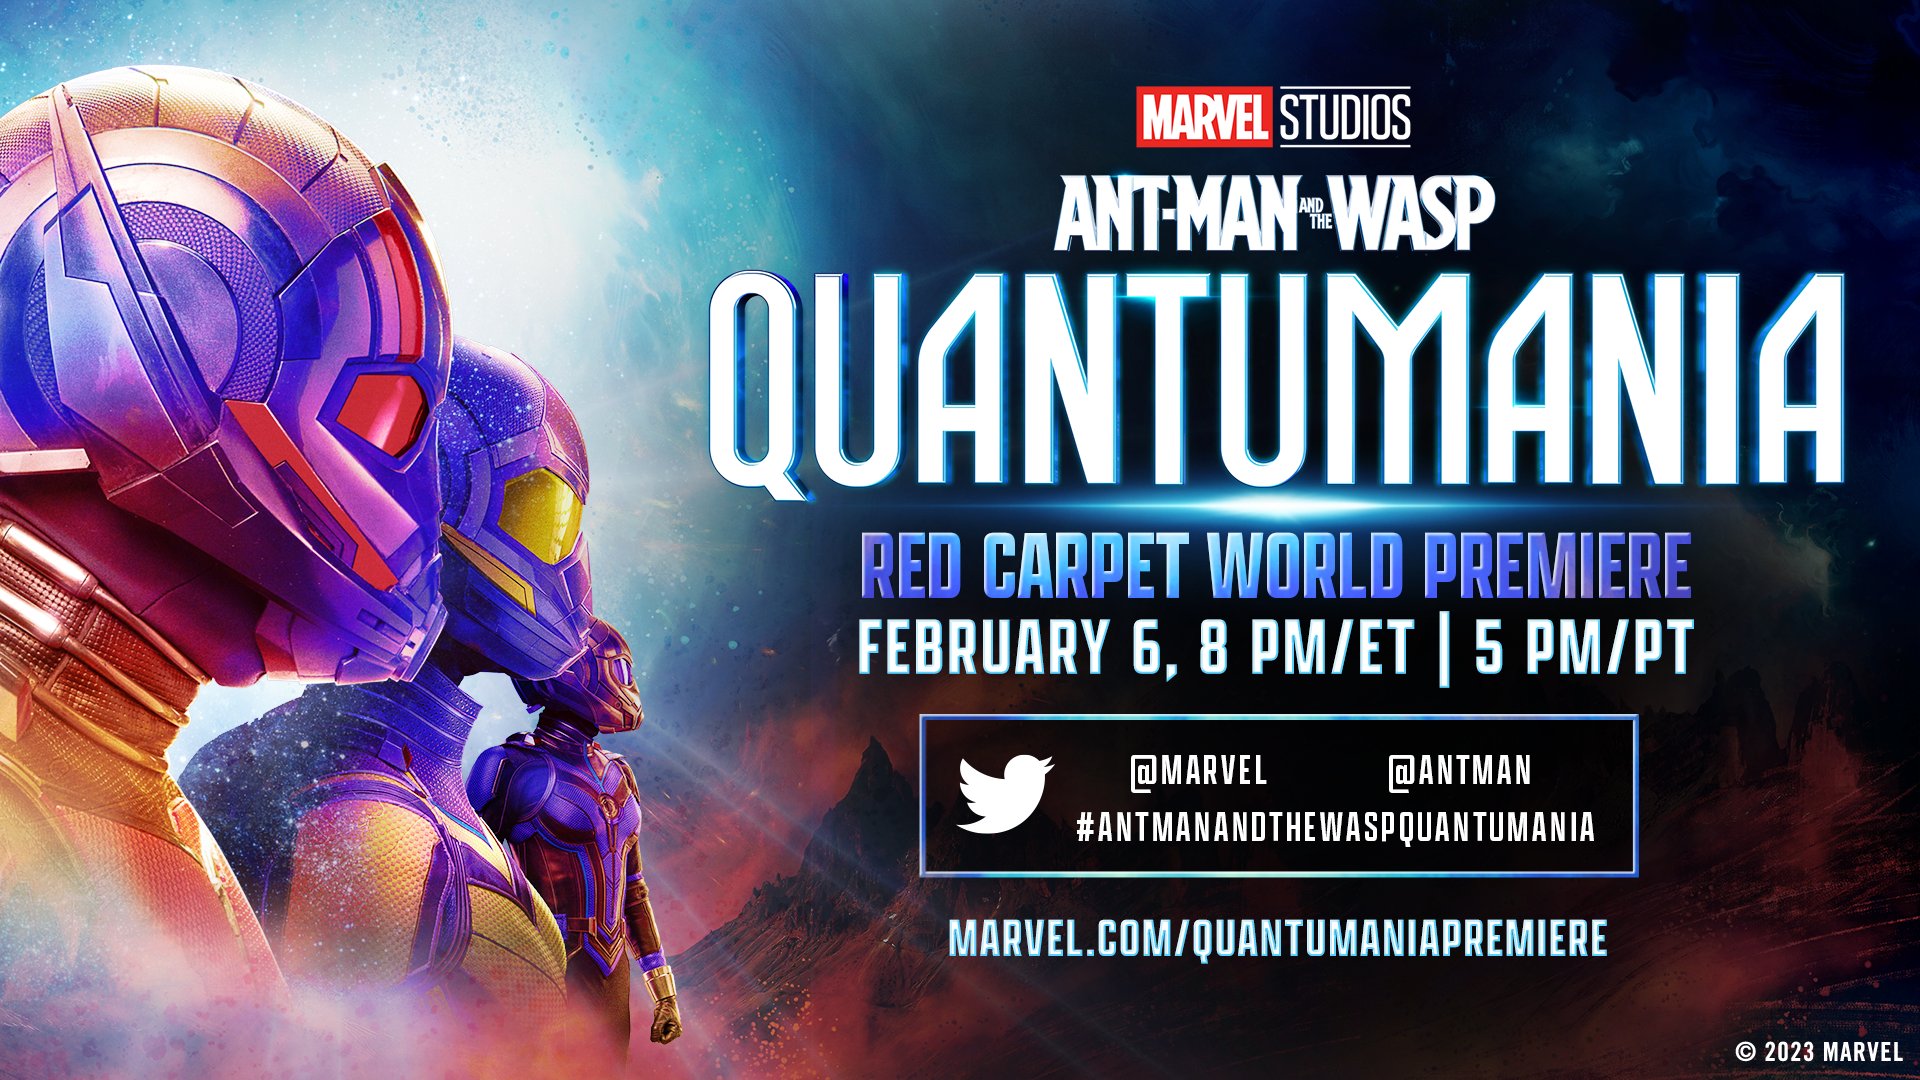 Ant-Man and the Wasp: Quantumania cast